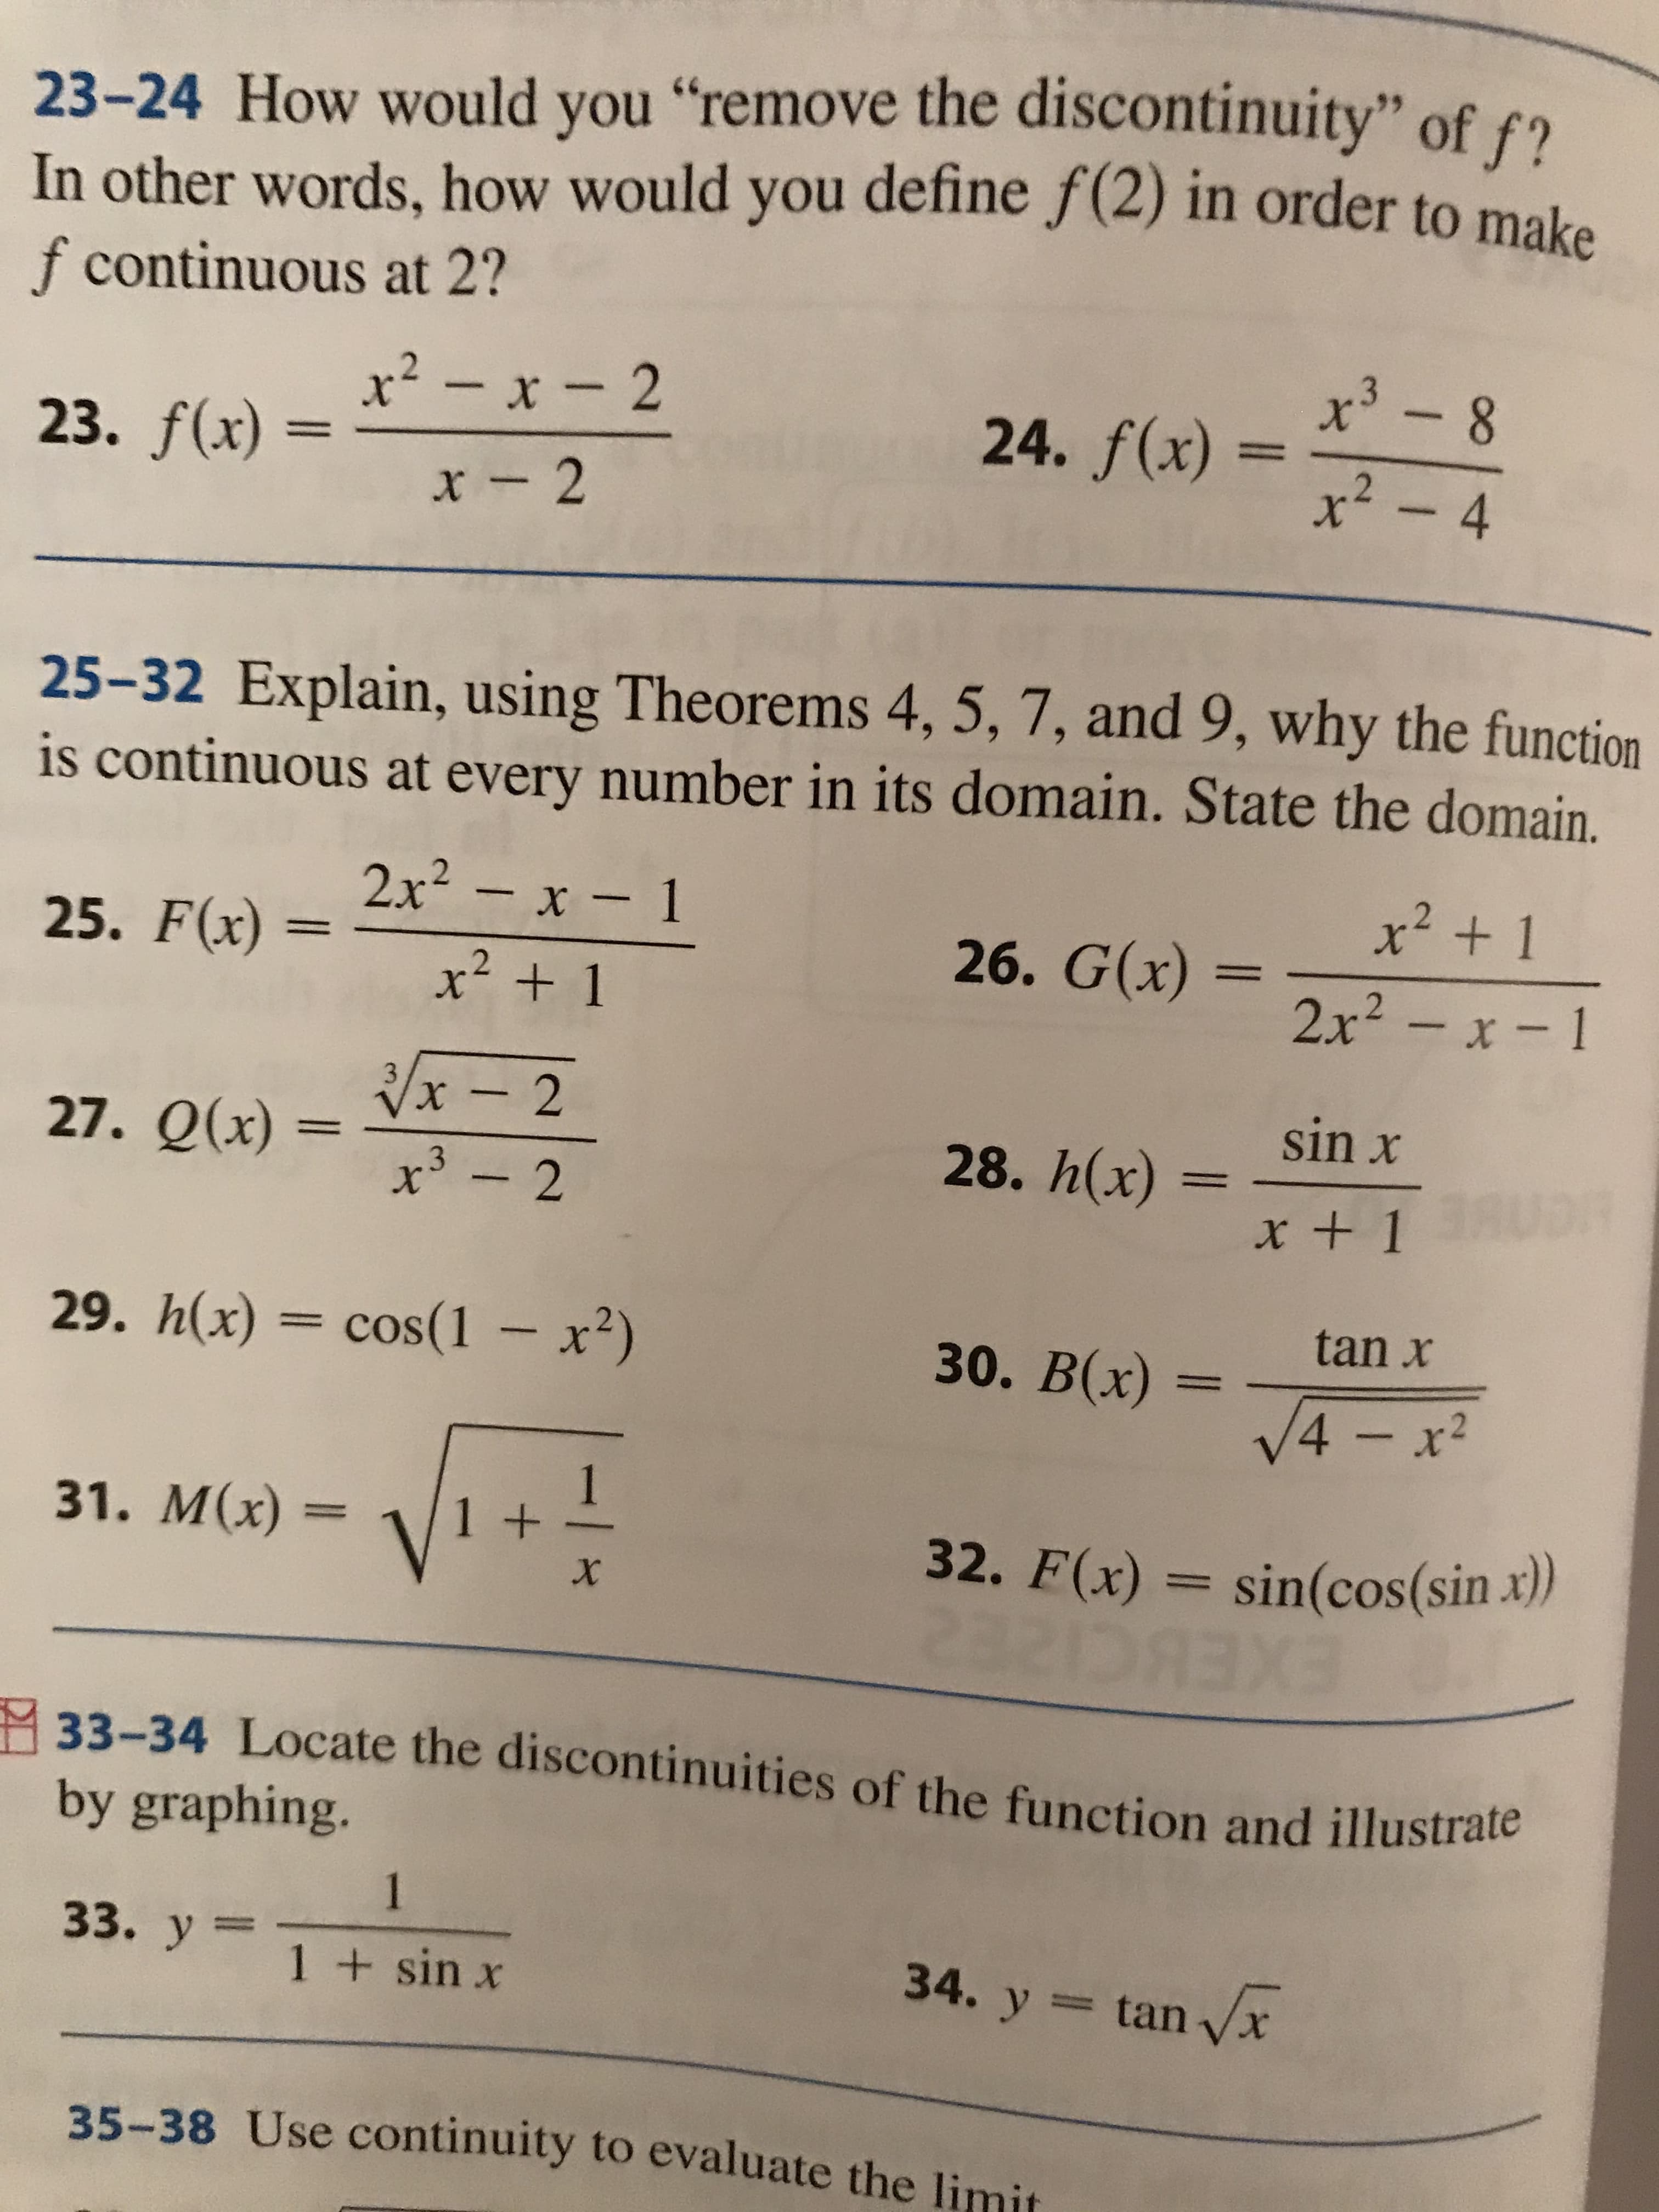 23-24 How would you "remove the discontinuity" of f?
In other words, how would you define f(2) in order to make
f continuous at 2?
x² - x - 2
+3
24. f(x)
23. f(x) =
x² -4
x -2
25-32 Explain, using Theorems 4, 5, 7, and 9, why the function
is continuous at every number in its domain. State the domain.
2x - x- 1
x2 + 1
25. F(x) :
х
26. G(x) =
.2
x + 1
2x2 - x-1
Vx – 2
3.
27. Q(x) =
sin x
28. h(x)
+3
x +1 U3R
29. h(x) = cos(1 – x²)
tan x
30. В(х)
V4 - x²
31. M(х) -
1+
32. F(x) = sin(cos(sin.x))
EXEBCIZE2
33-34 Locate the discontinuities of the function and illustrate
by graphing.
1
33. y =
1 + sin x
34. y = tan x
35-38 Use continuity to evaluate the limit
